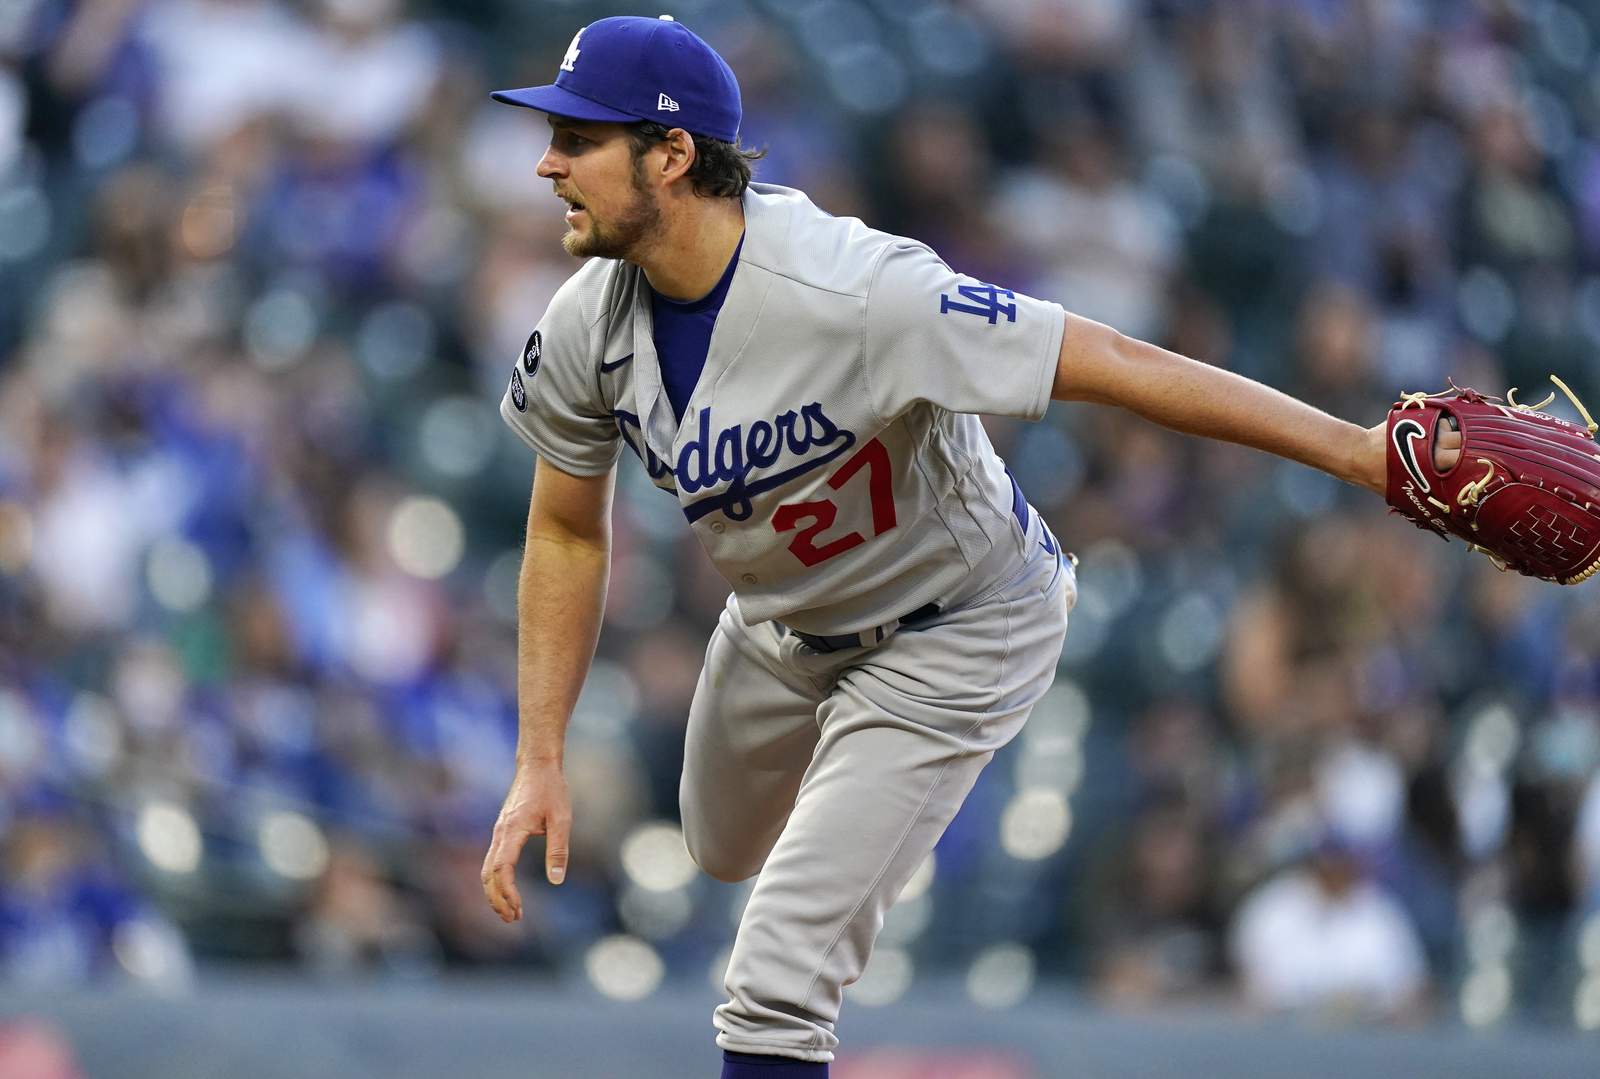 Freeman reaches 3 times, scores in Dodgers debut, beats Rox